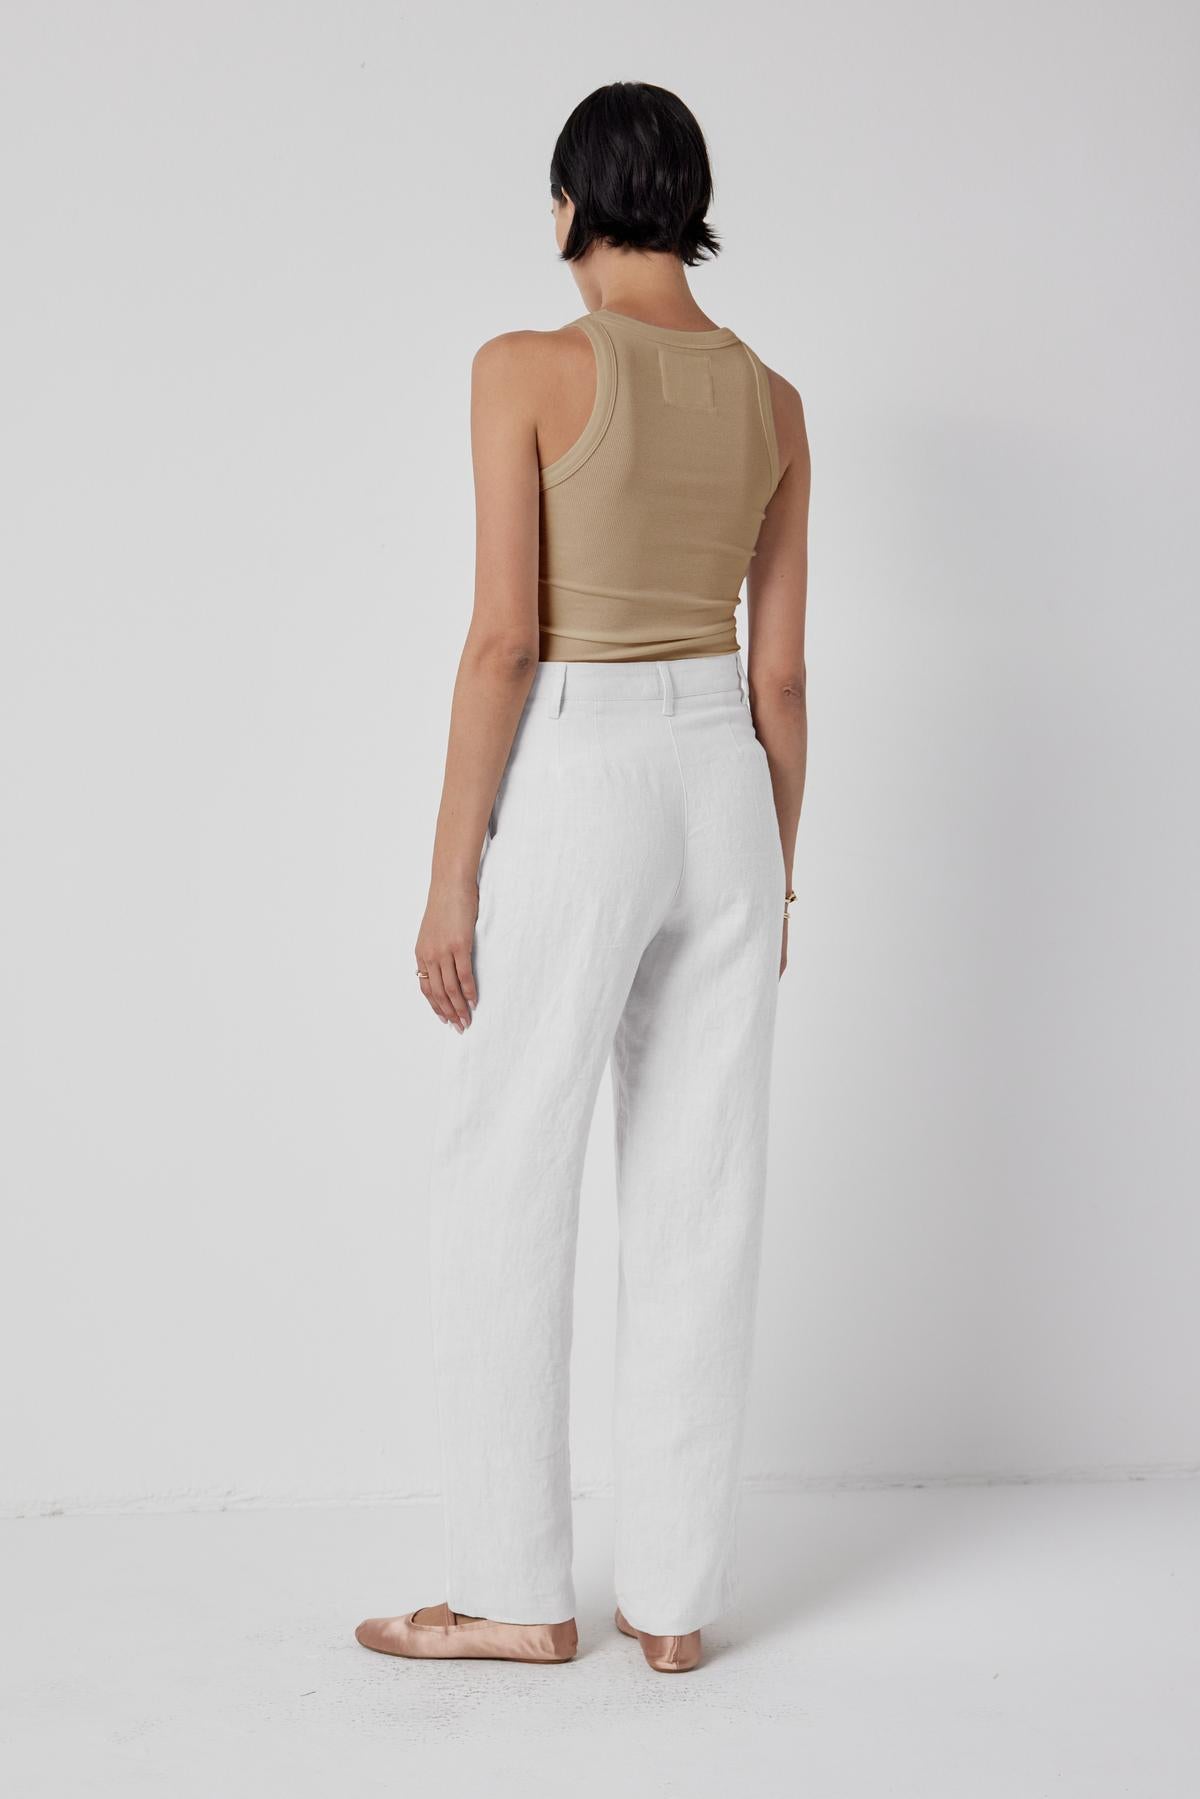   Woman standing in a white studio wearing white pants and a chic beige heavy rib CRUZ tank top by Velvet by Jenny Graham, viewed from behind. 